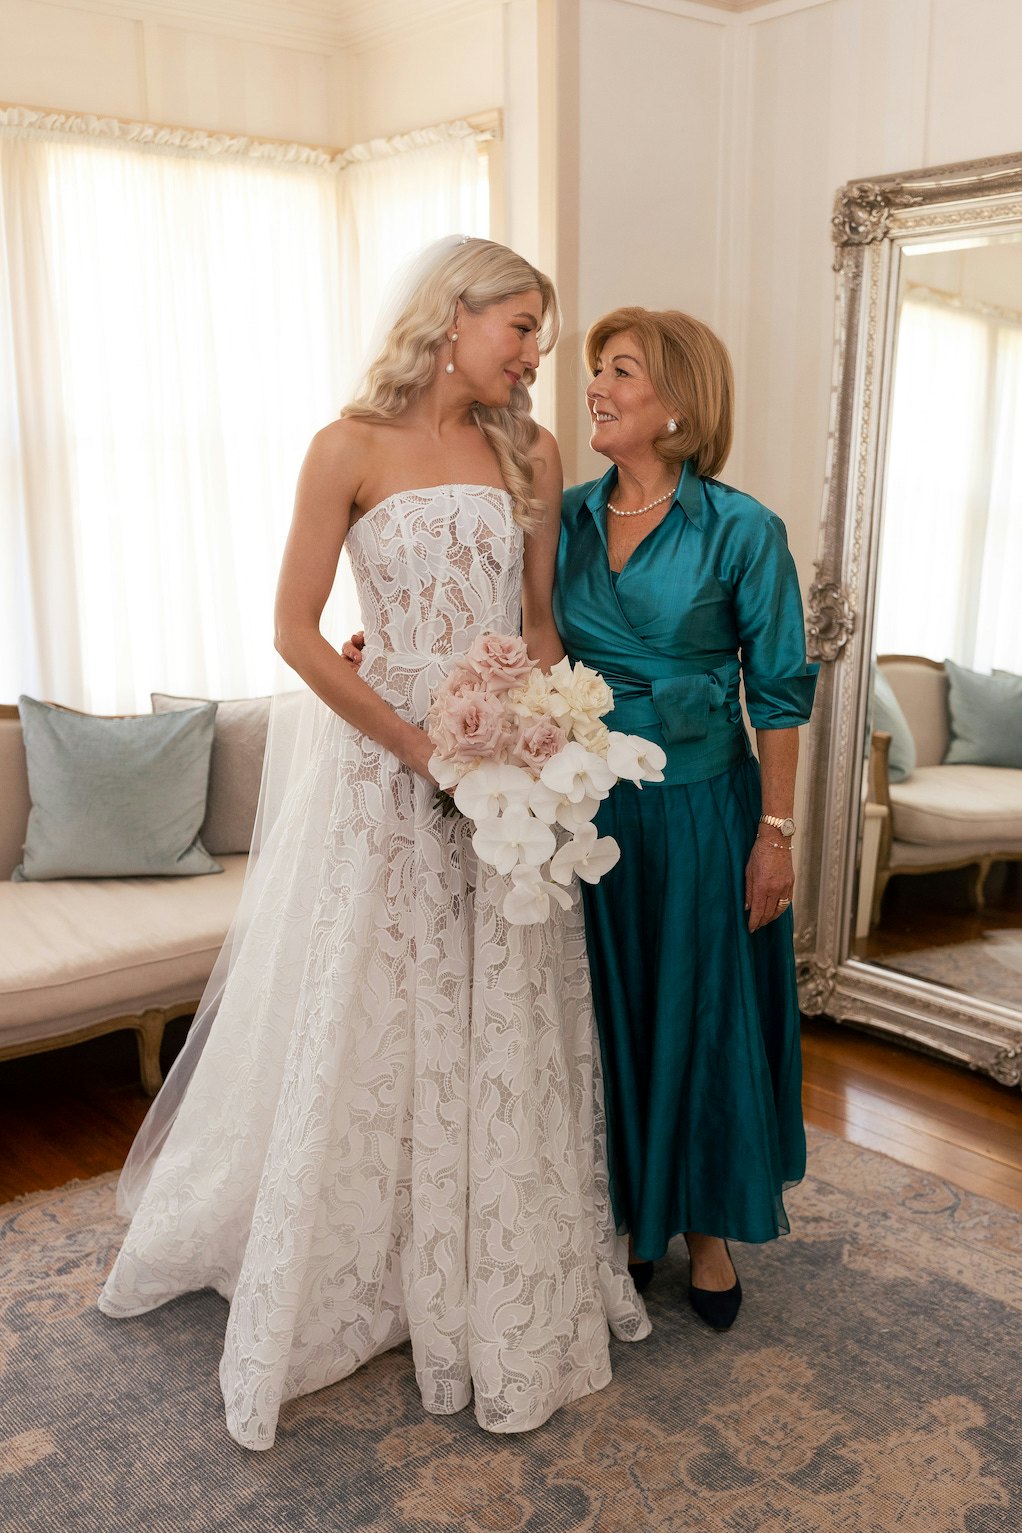 Bride and mother at wedding